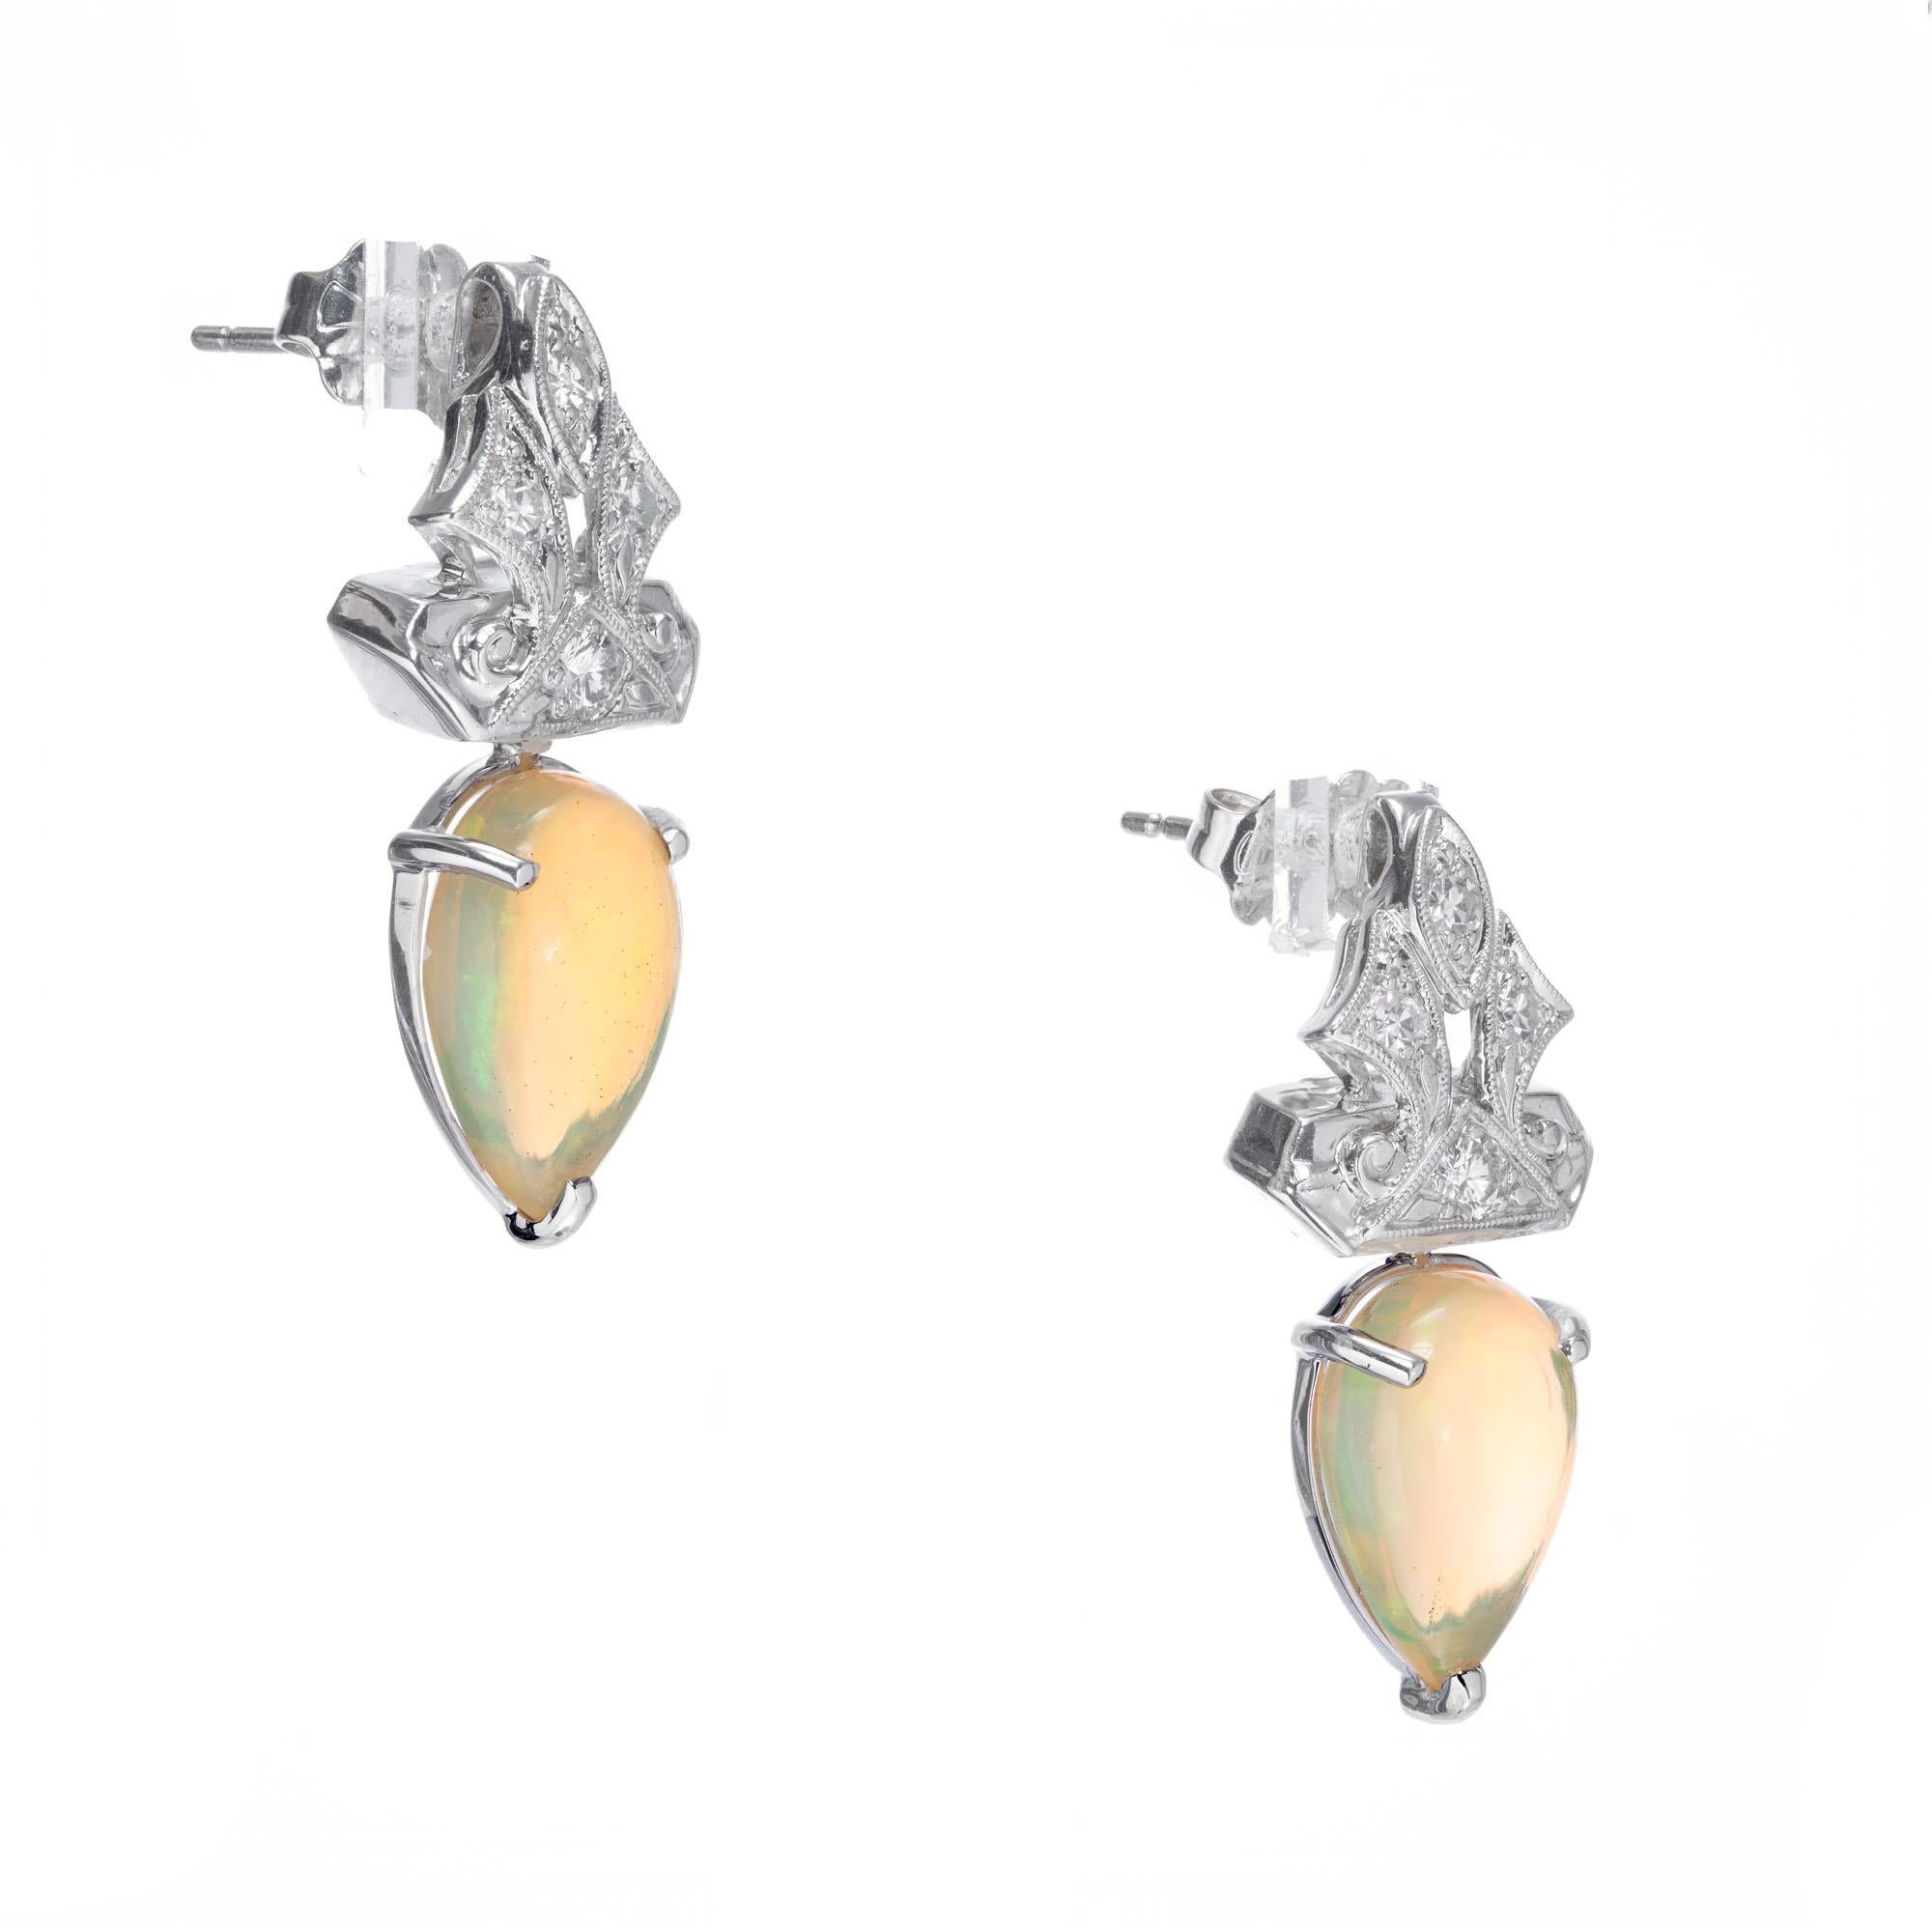 Opal and diamond dangle earrings. 2 translucent pear shaped Opals with 8 round accent diamonds. Crafted in the Peter Suchy Workshop. 

2 pearl cabochon blue green and orange flash Opals, approx. total weight 3.51cts
8 Diamonds, approx. total weight